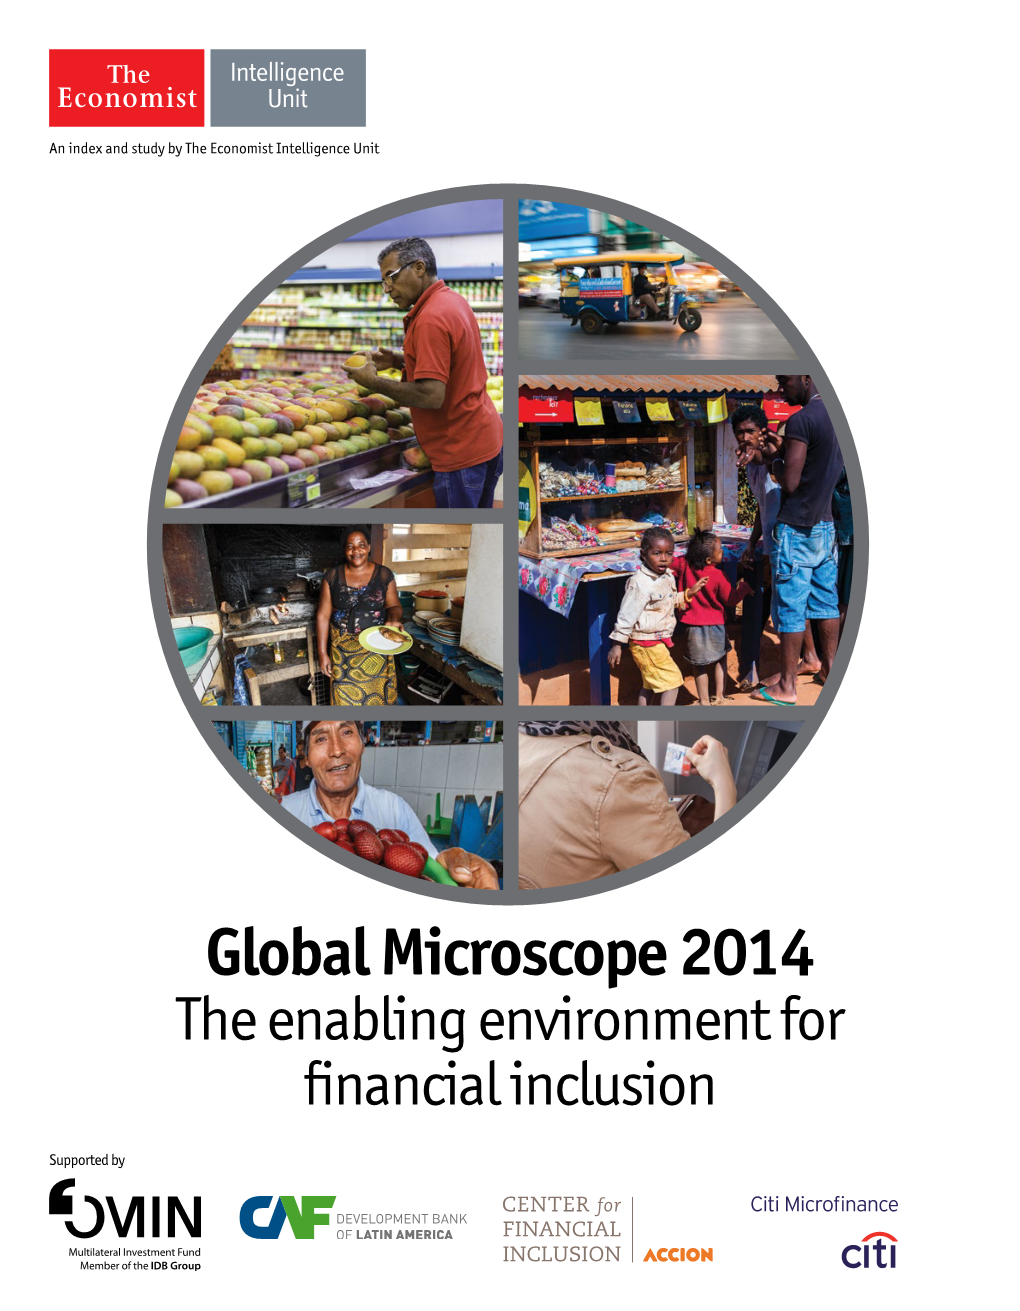 Global Microscope 2014 the Enabling Environment for Financial Inclusion